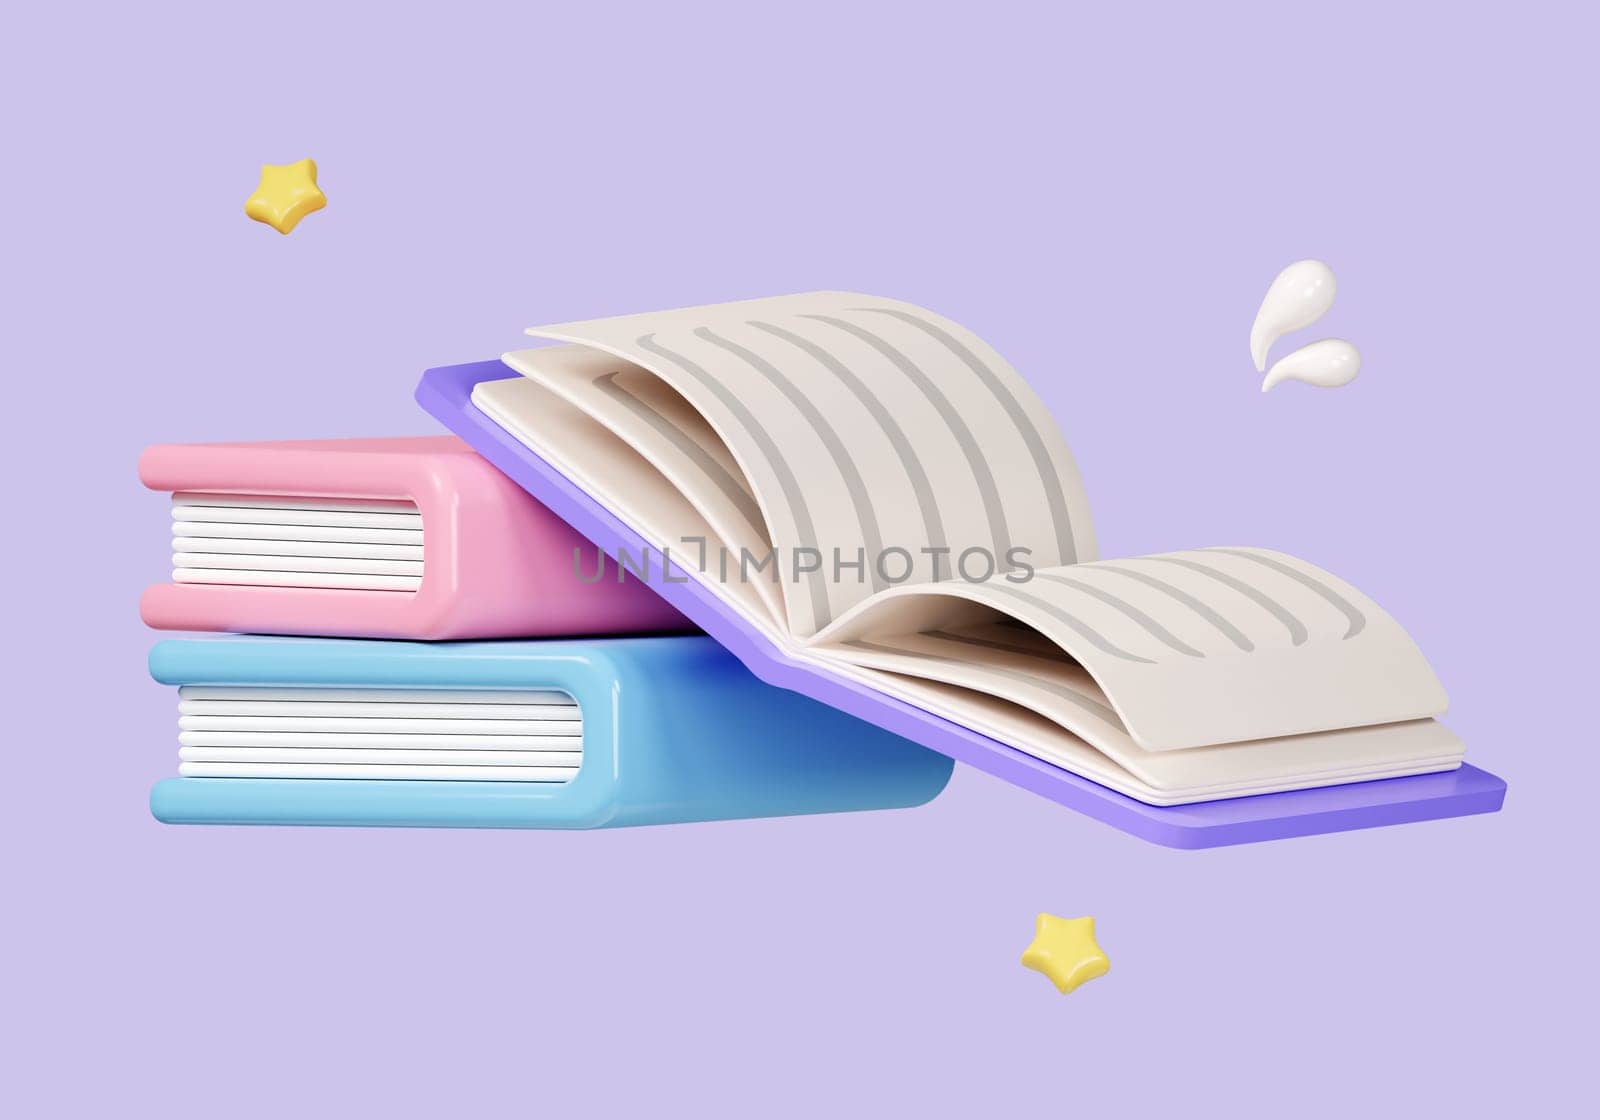 Open book on books stack isolated on pastel background. icon symbol clipping path. education. 3d render illustration by meepiangraphic